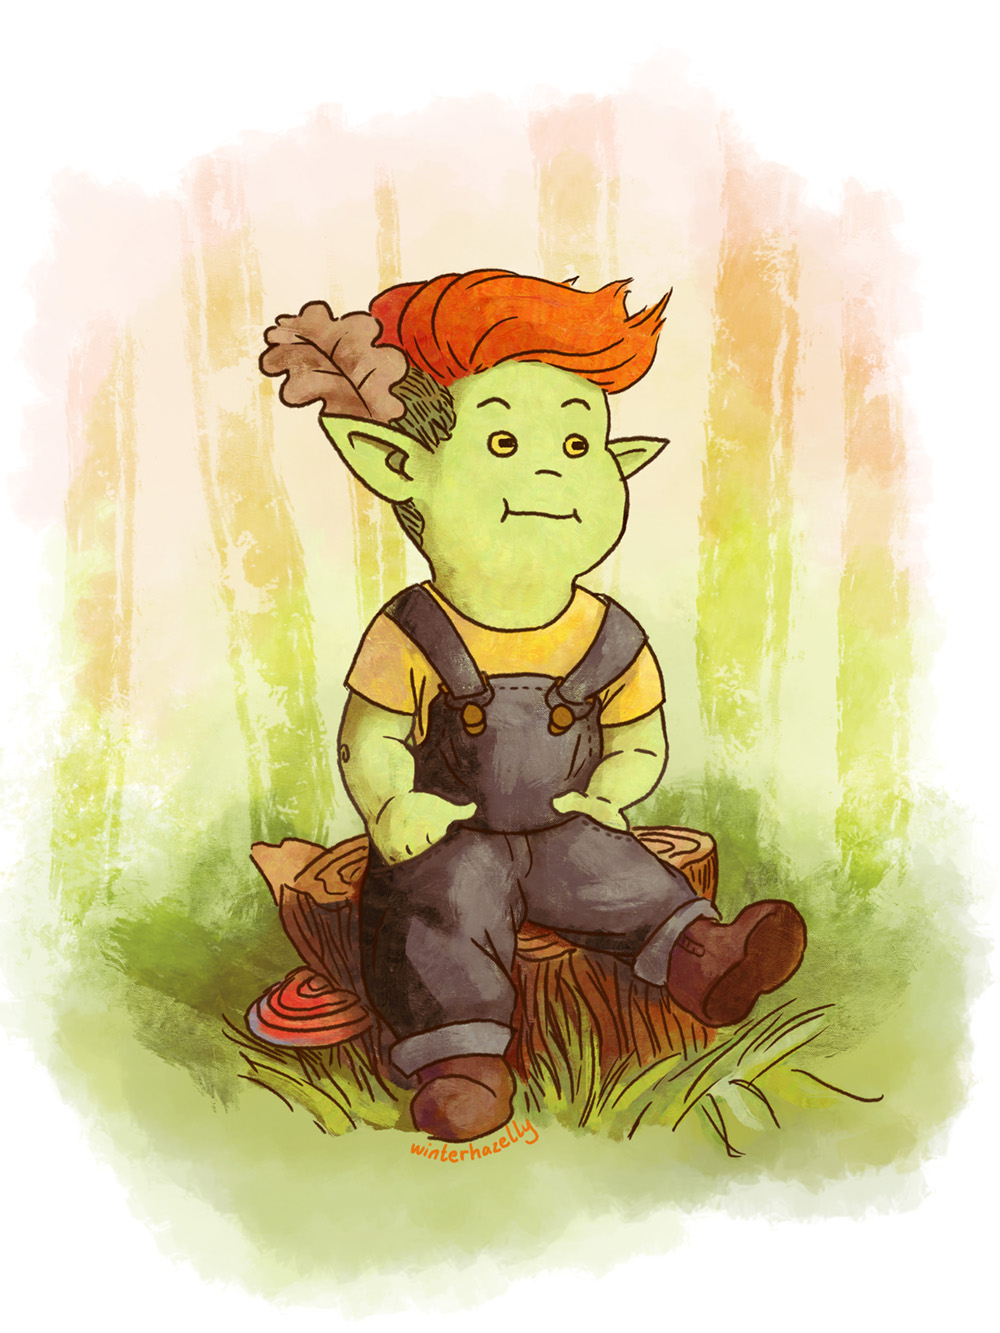 Drawing of a little green goblin in overalls, with a ginger undercut and a leaf behind their ear, sitting on a treestump and looking happy.